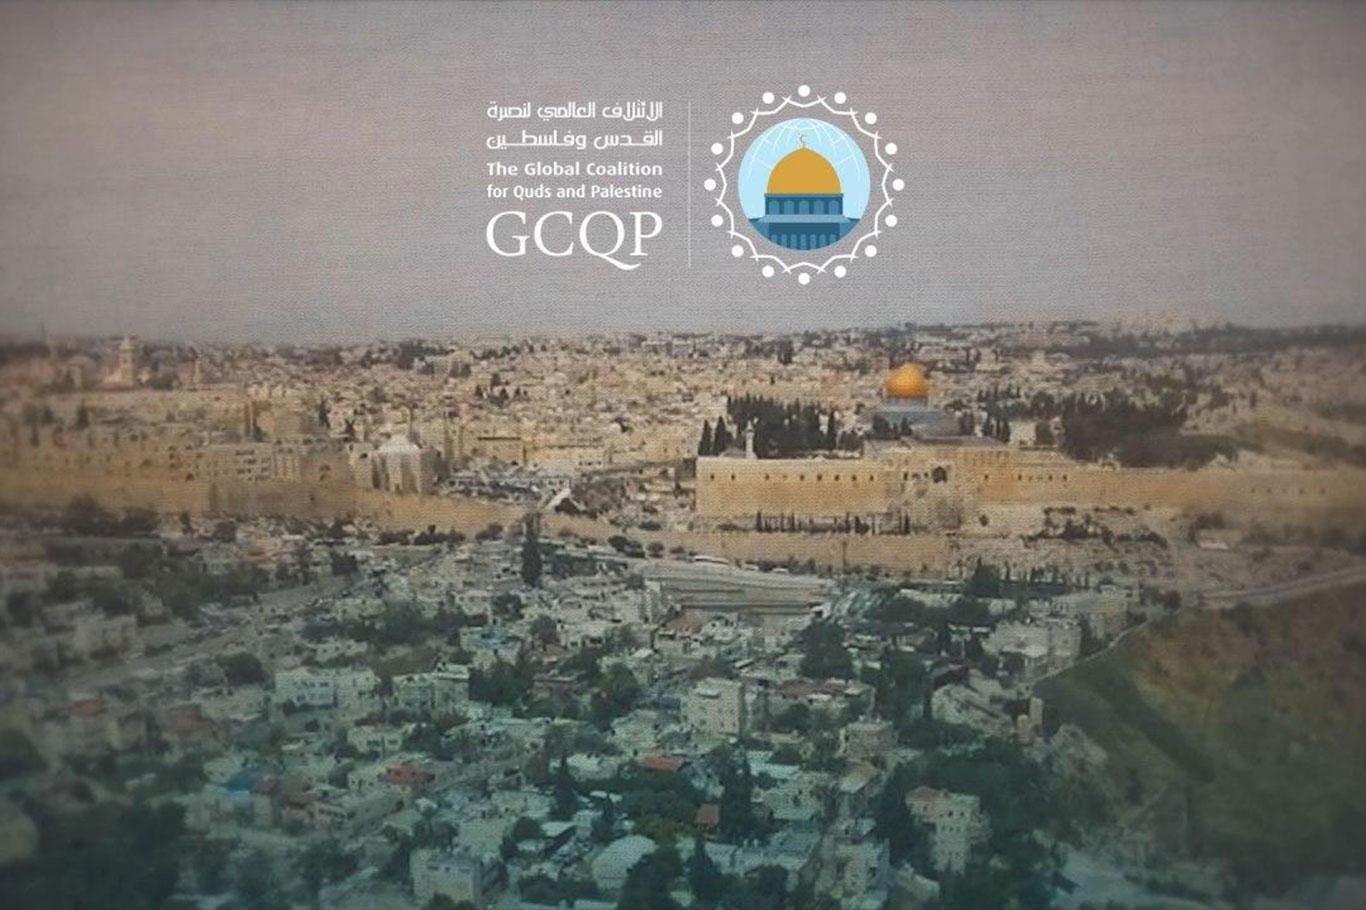 GCQP calls on Muslims to continue protests against the so-called "Deal of the Century"